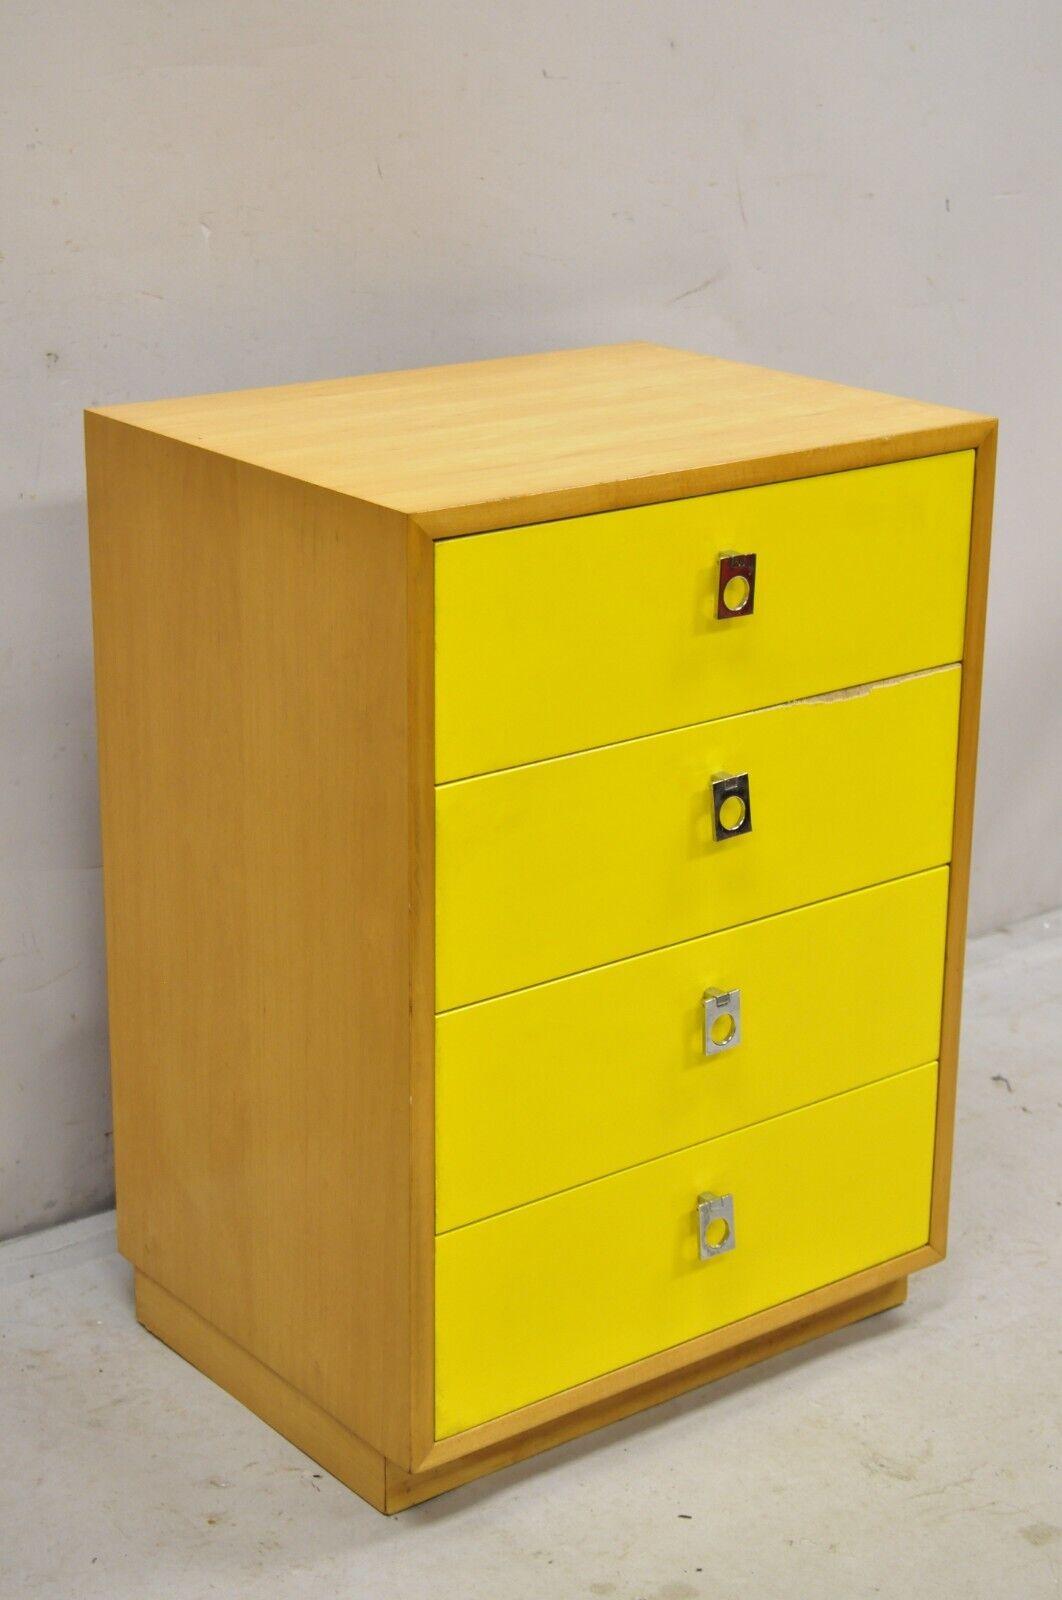 Founders Jack Cartwright Mid Century Modern Yellow Nightstand Chest Maple Chrome. Item features the original label and serial number, 4 dovetailed drawers, beautiful maple wood veneer, Chrome hardware, Clean modernist lines. Circa Mid 20th Century.